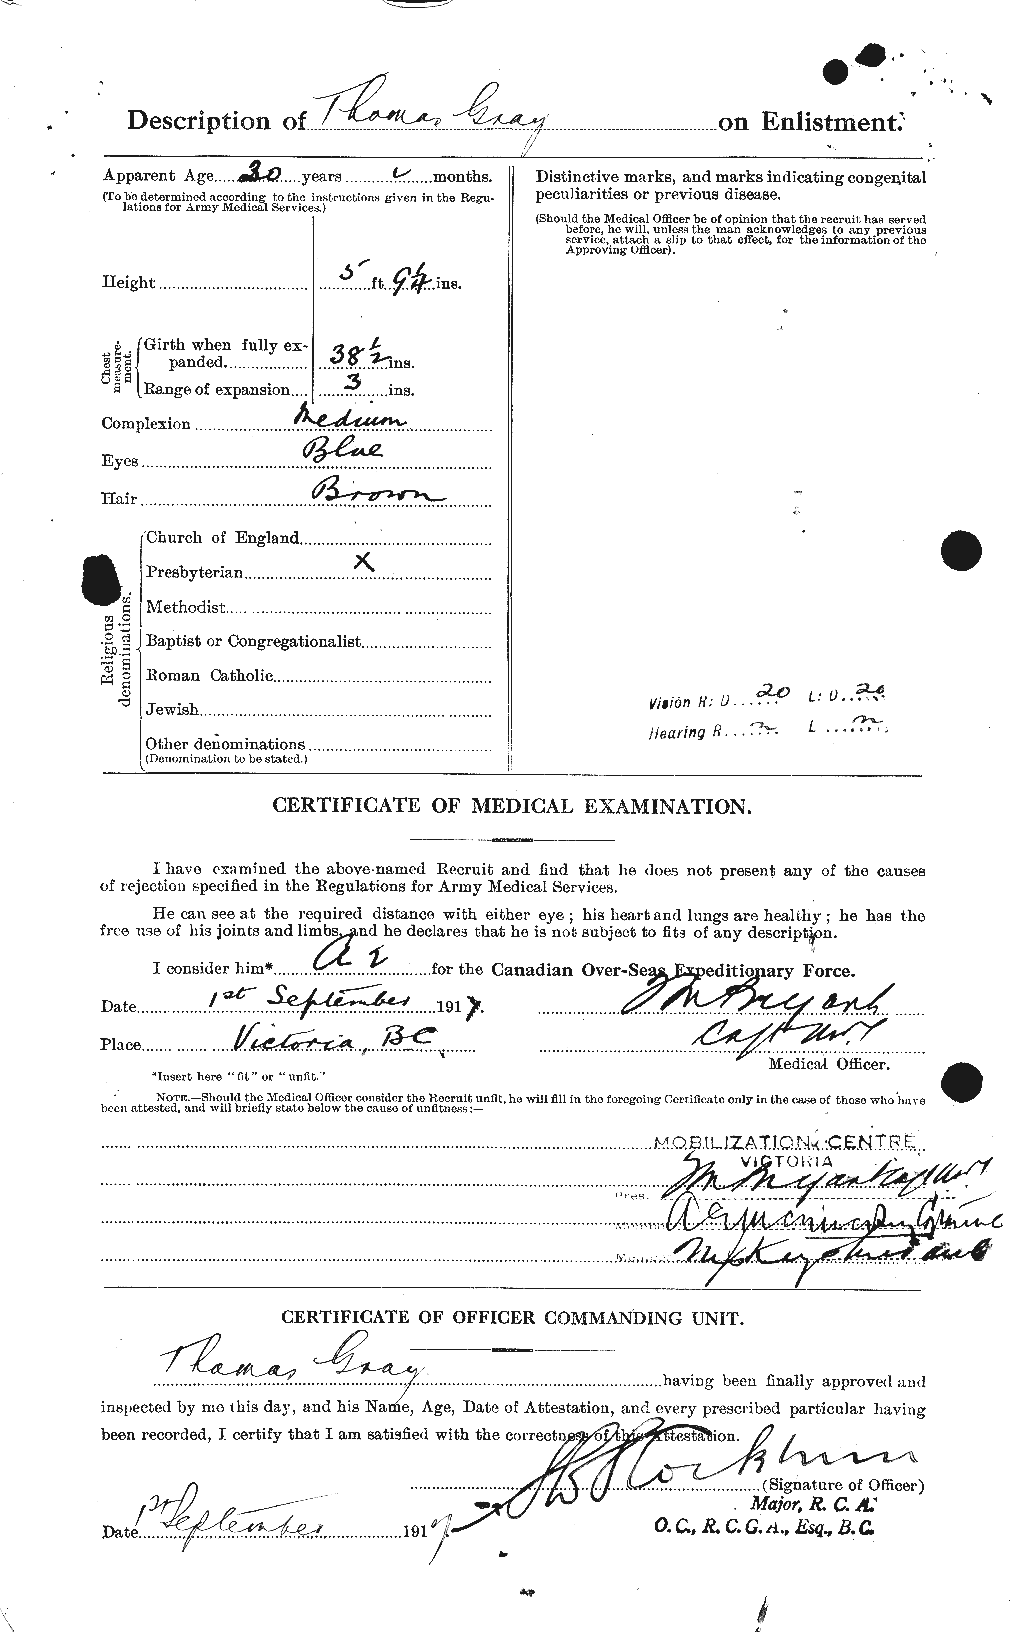 Personnel Records of the First World War - CEF 360775b